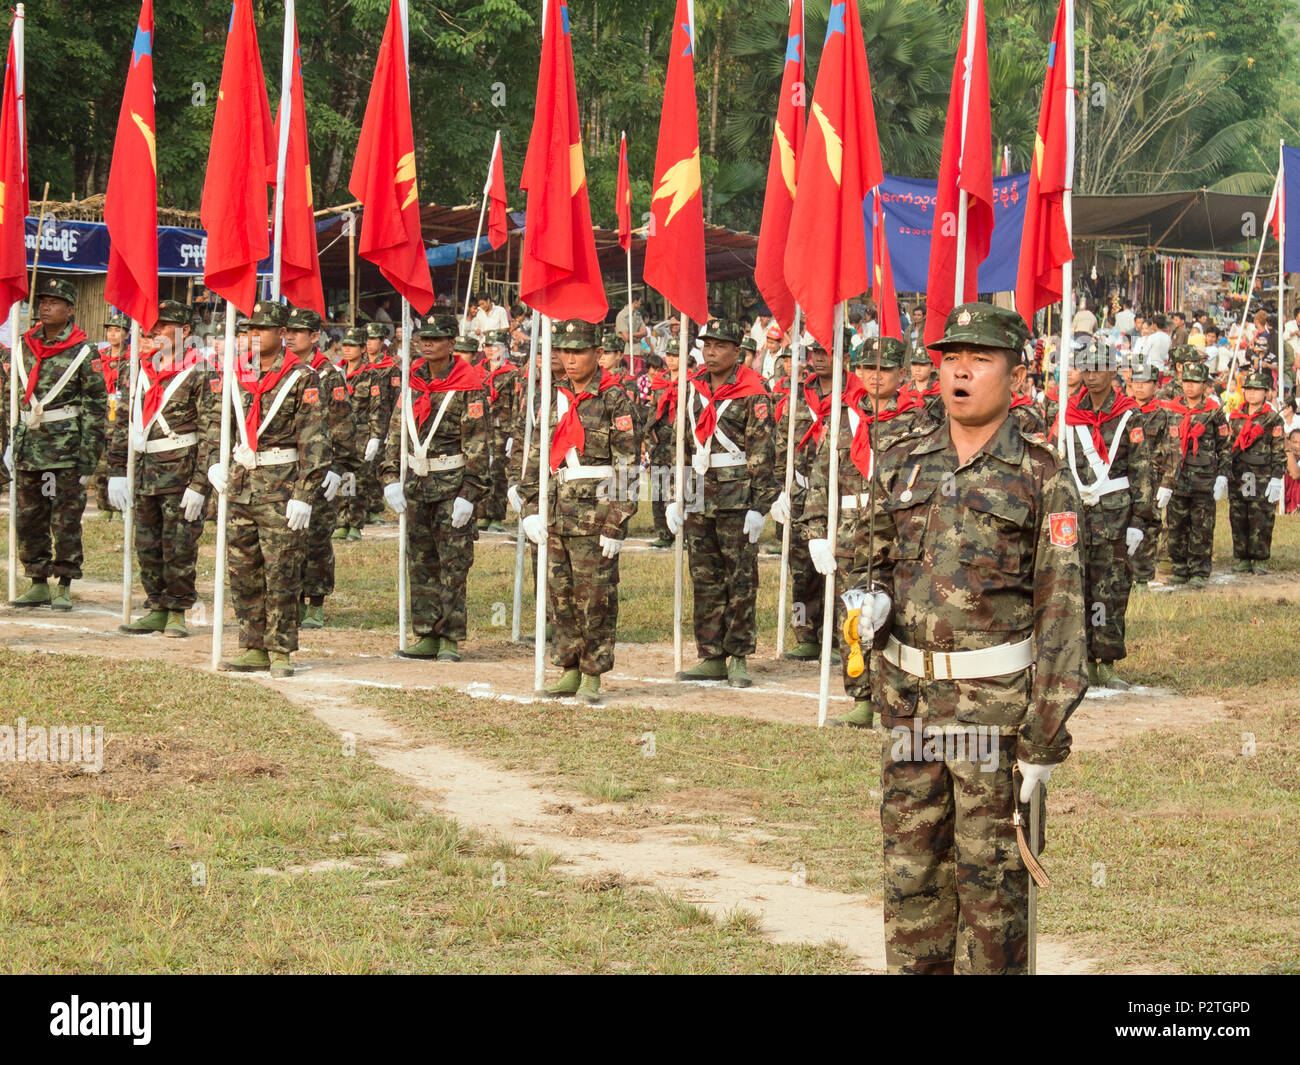 Fighters of the Monland Restoration Army at a parade to celebrate Mon National Day in Mon state, eastern Myanmar Stock Photo